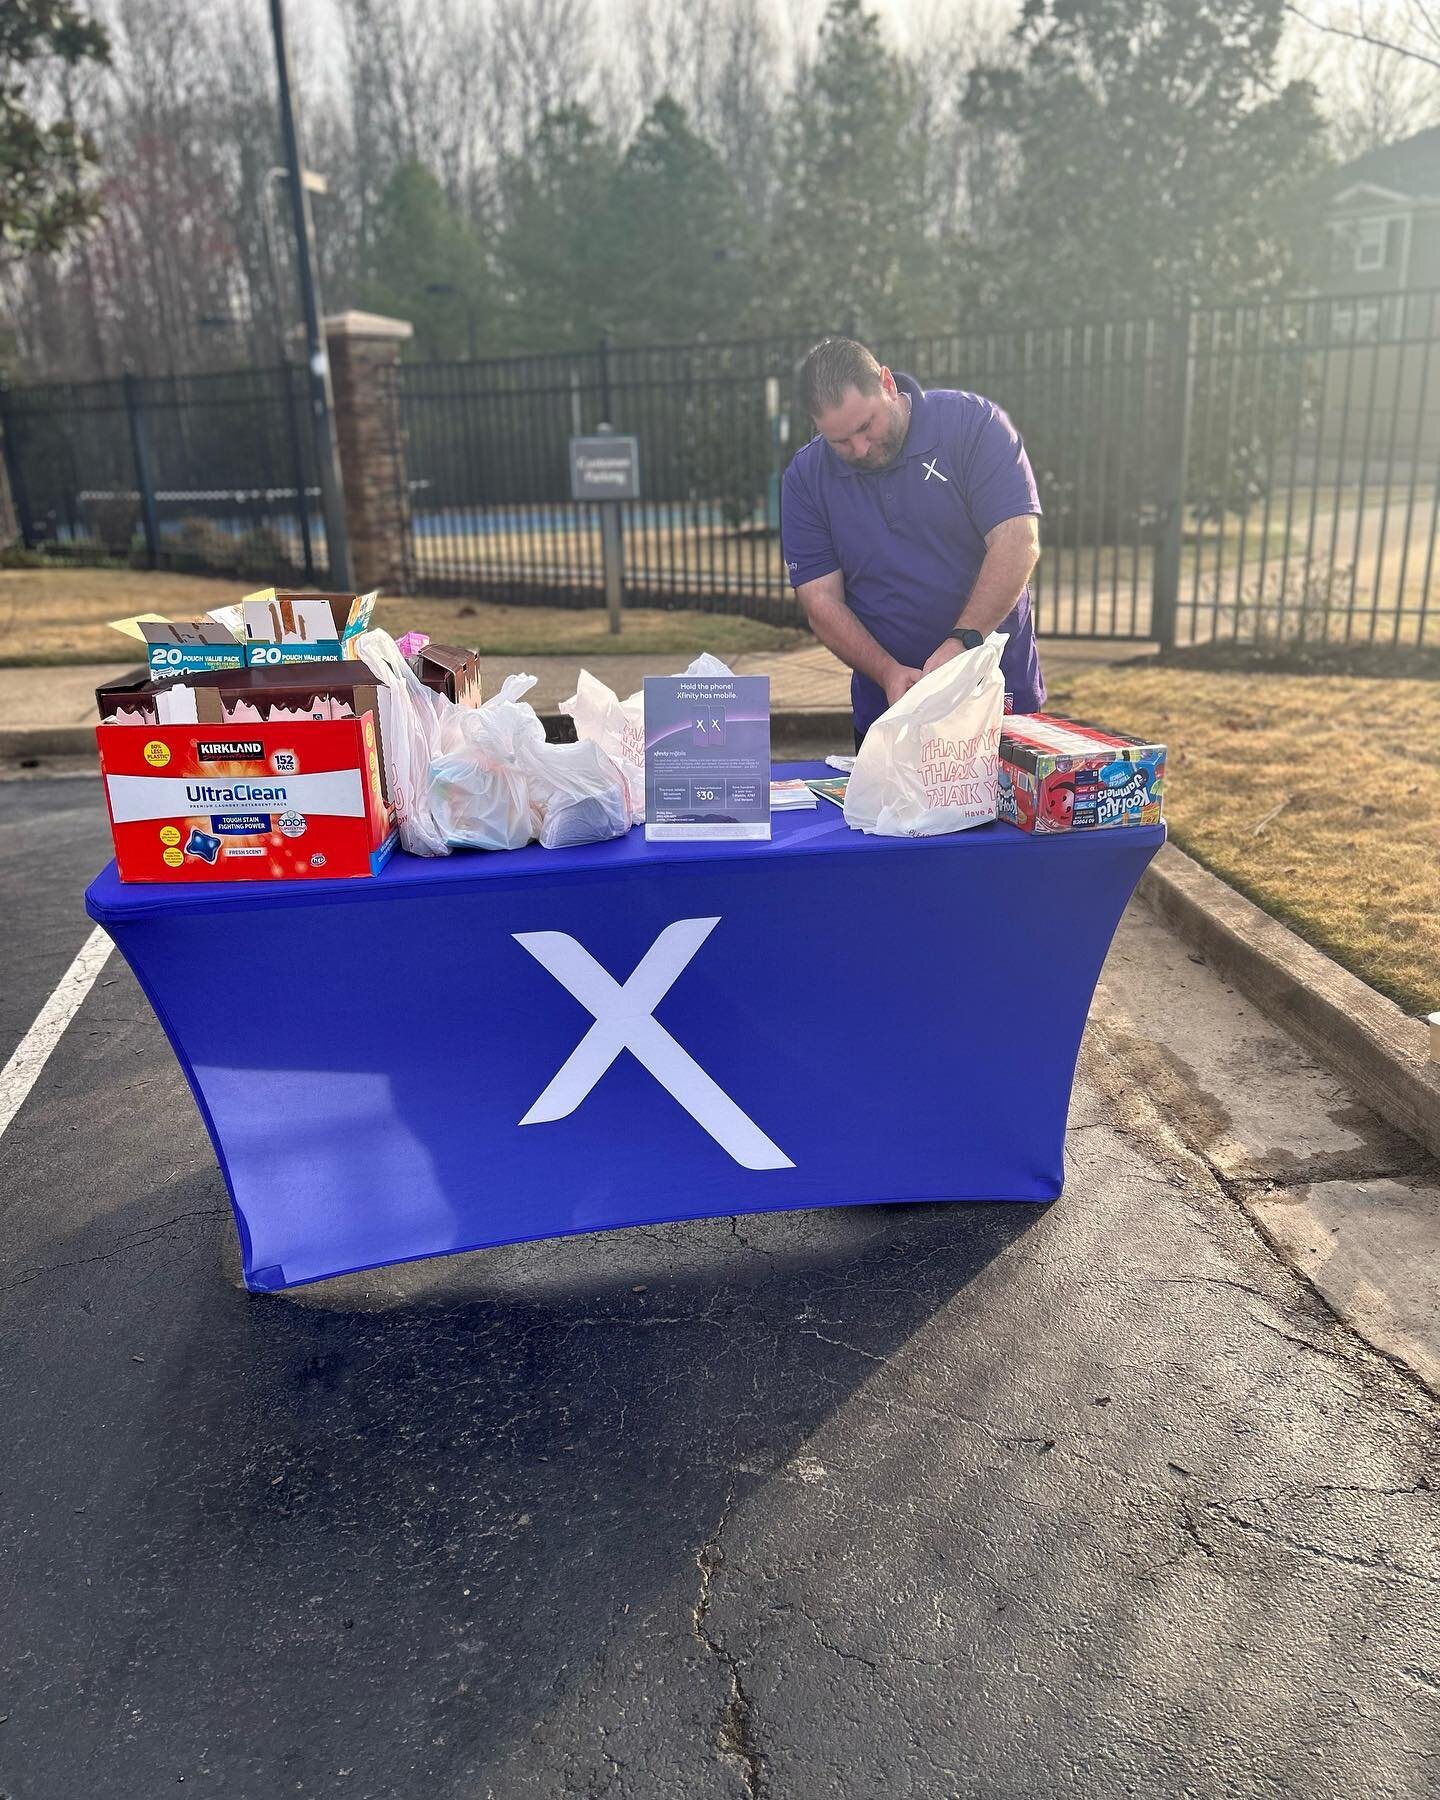 Breakfast on the go was a success! Xfinity came by and served residents with a great breakfast and awesome info on our resident referral! Tell a friend to come visit us today! #memphisliving #breakfastforchamps #earlybirdgetstheworm